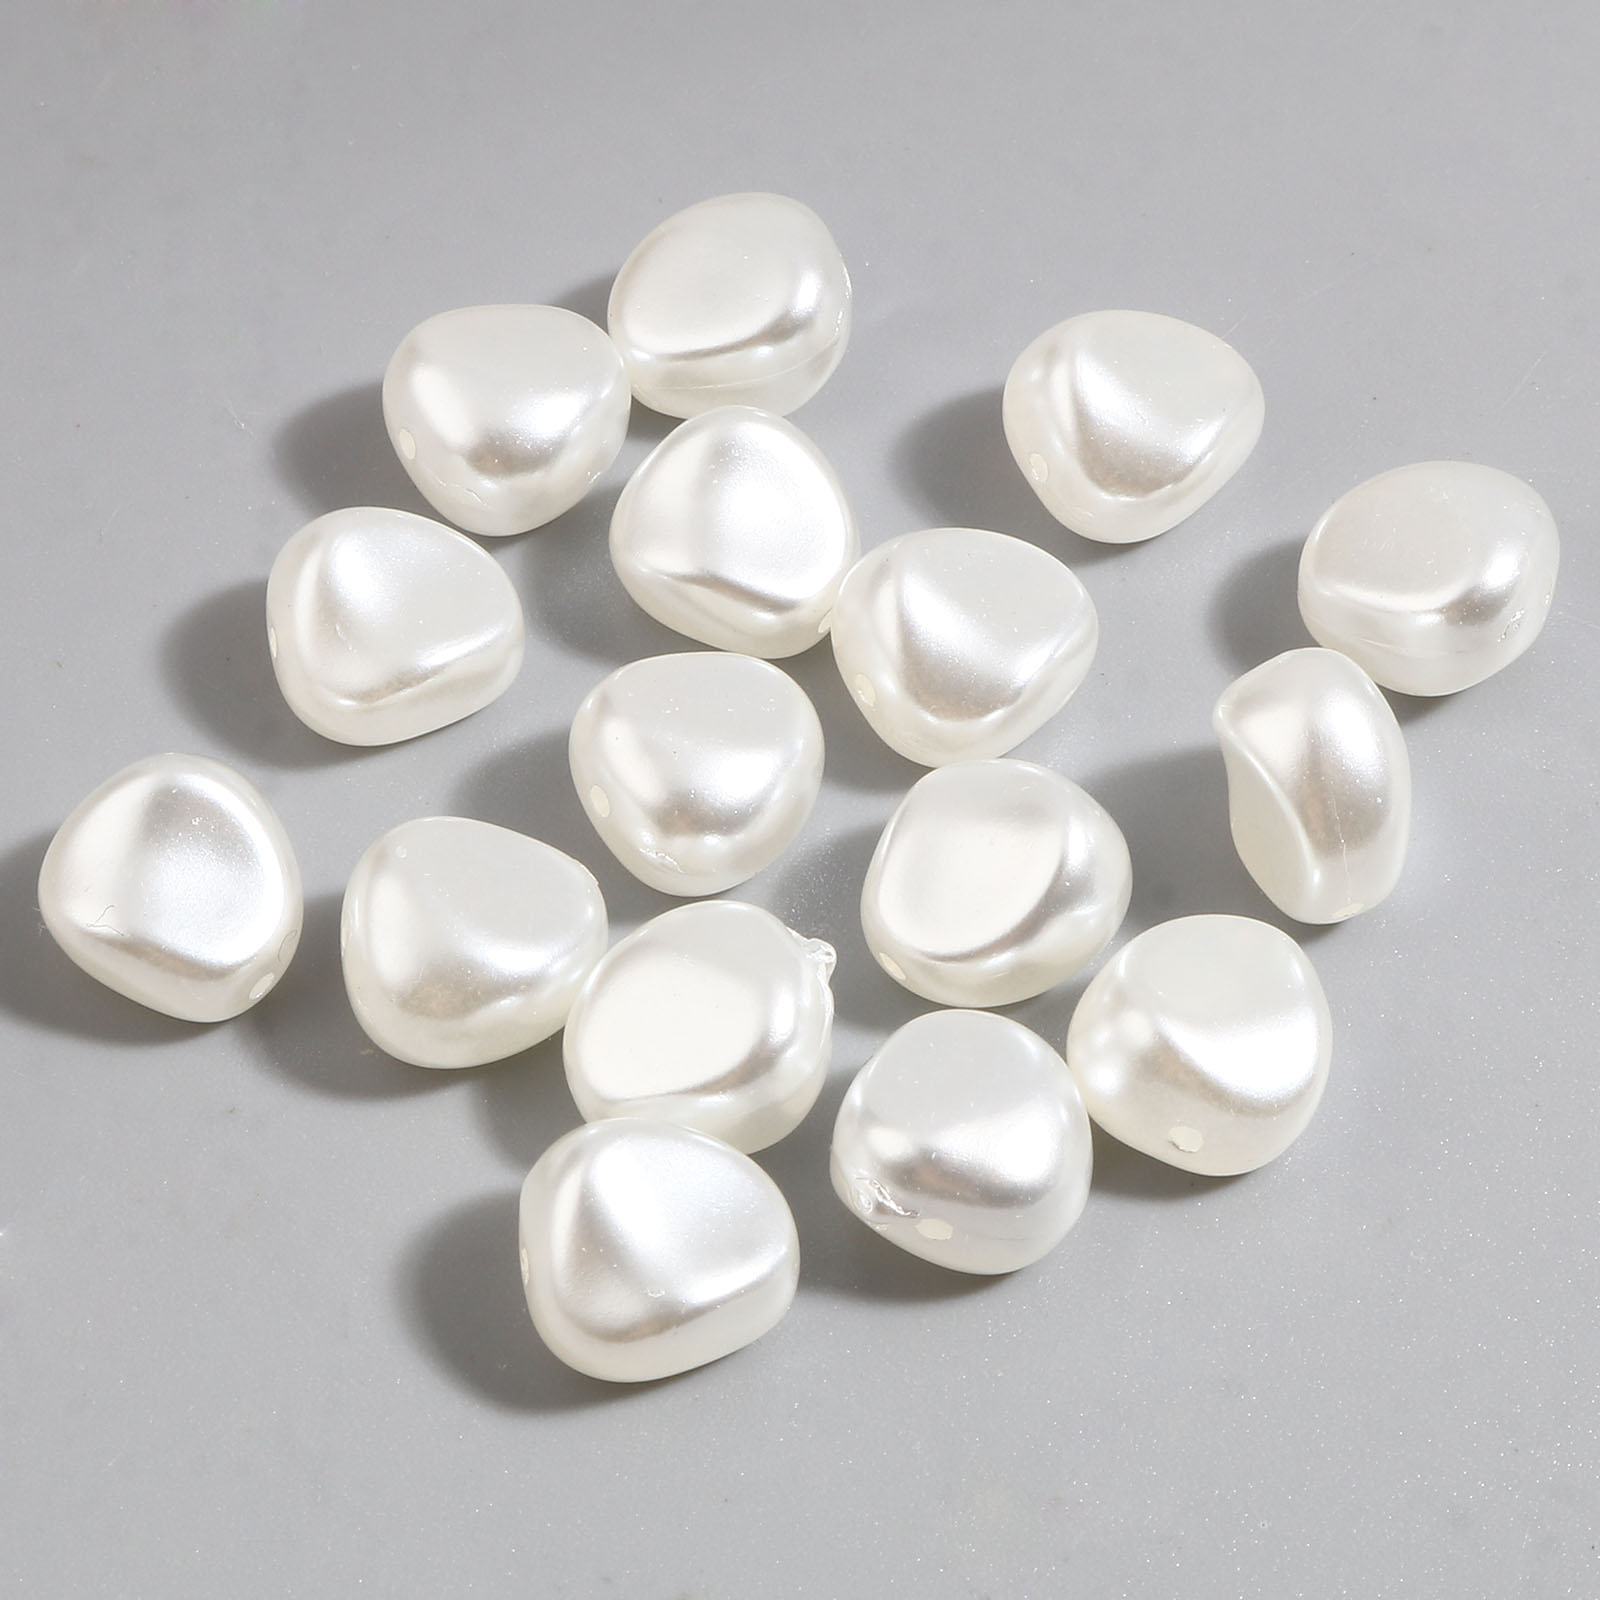 Picture of Acrylic Baroque Beads Irregular White Imitation Pearl About 11mm x 10.5mm, Hole: Approx 1.2mm, 100 PCs